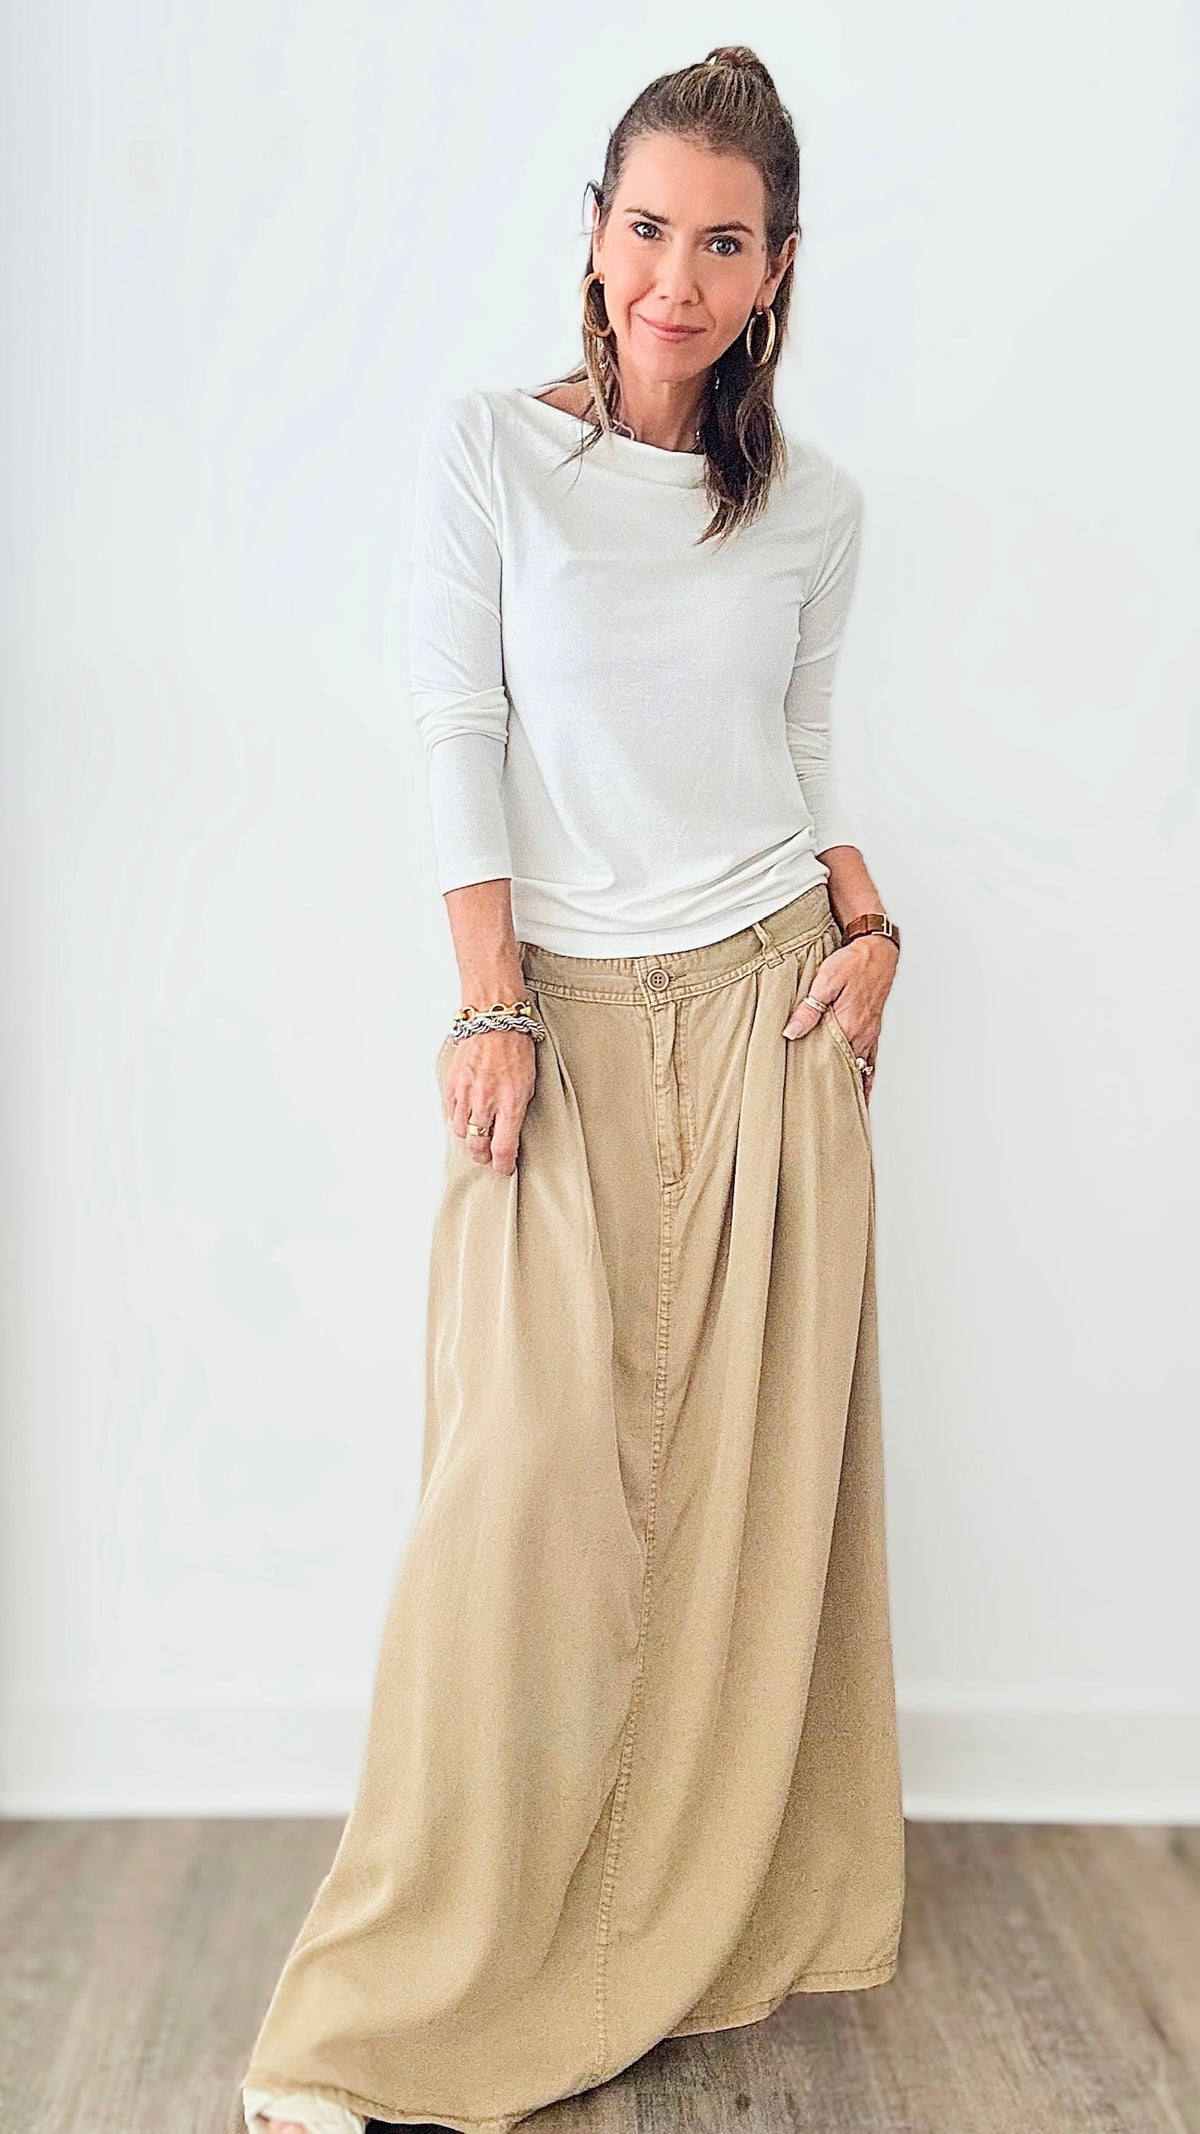 90s Baby Tencel Skirt-170 Bottoms-RISEN JEANS-Coastal Bloom Boutique, find the trendiest versions of the popular styles and looks Located in Indialantic, FL